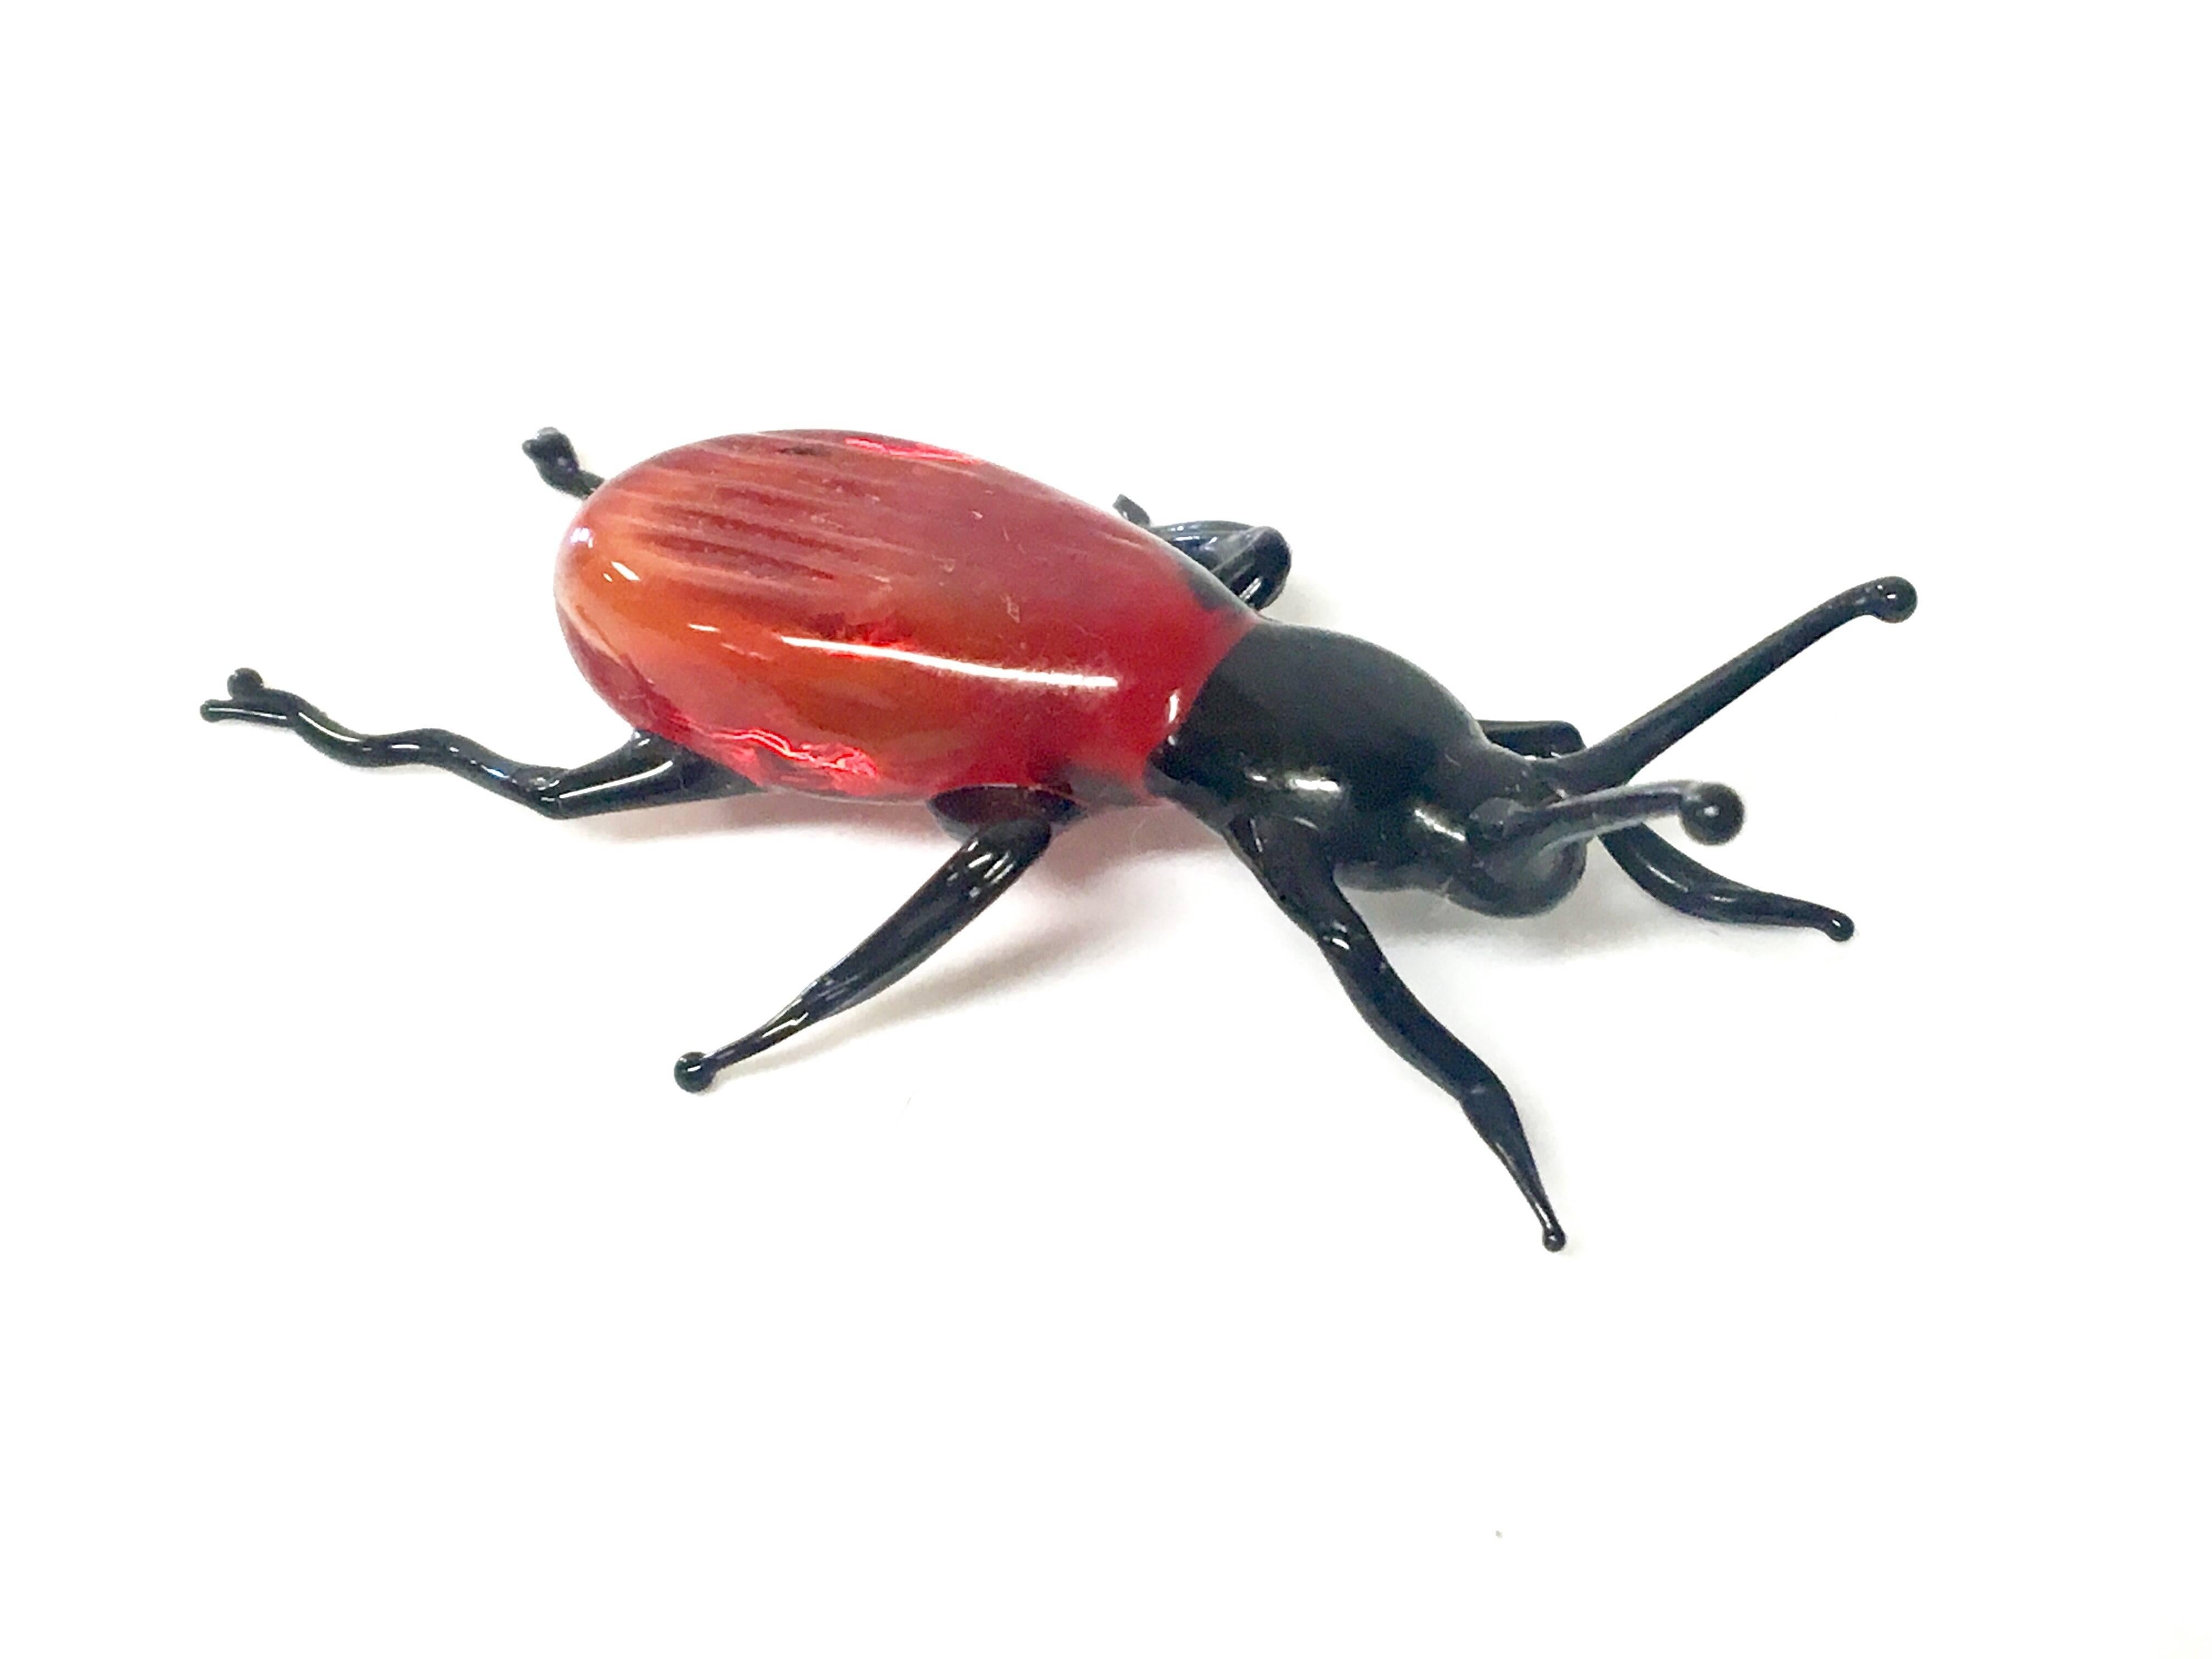 Beautiful and rare beetle Murano glass miniature beetle or insect sculpture, circa 1970s. Excellent detail and very realistic looking with wonderful vibrant colors.